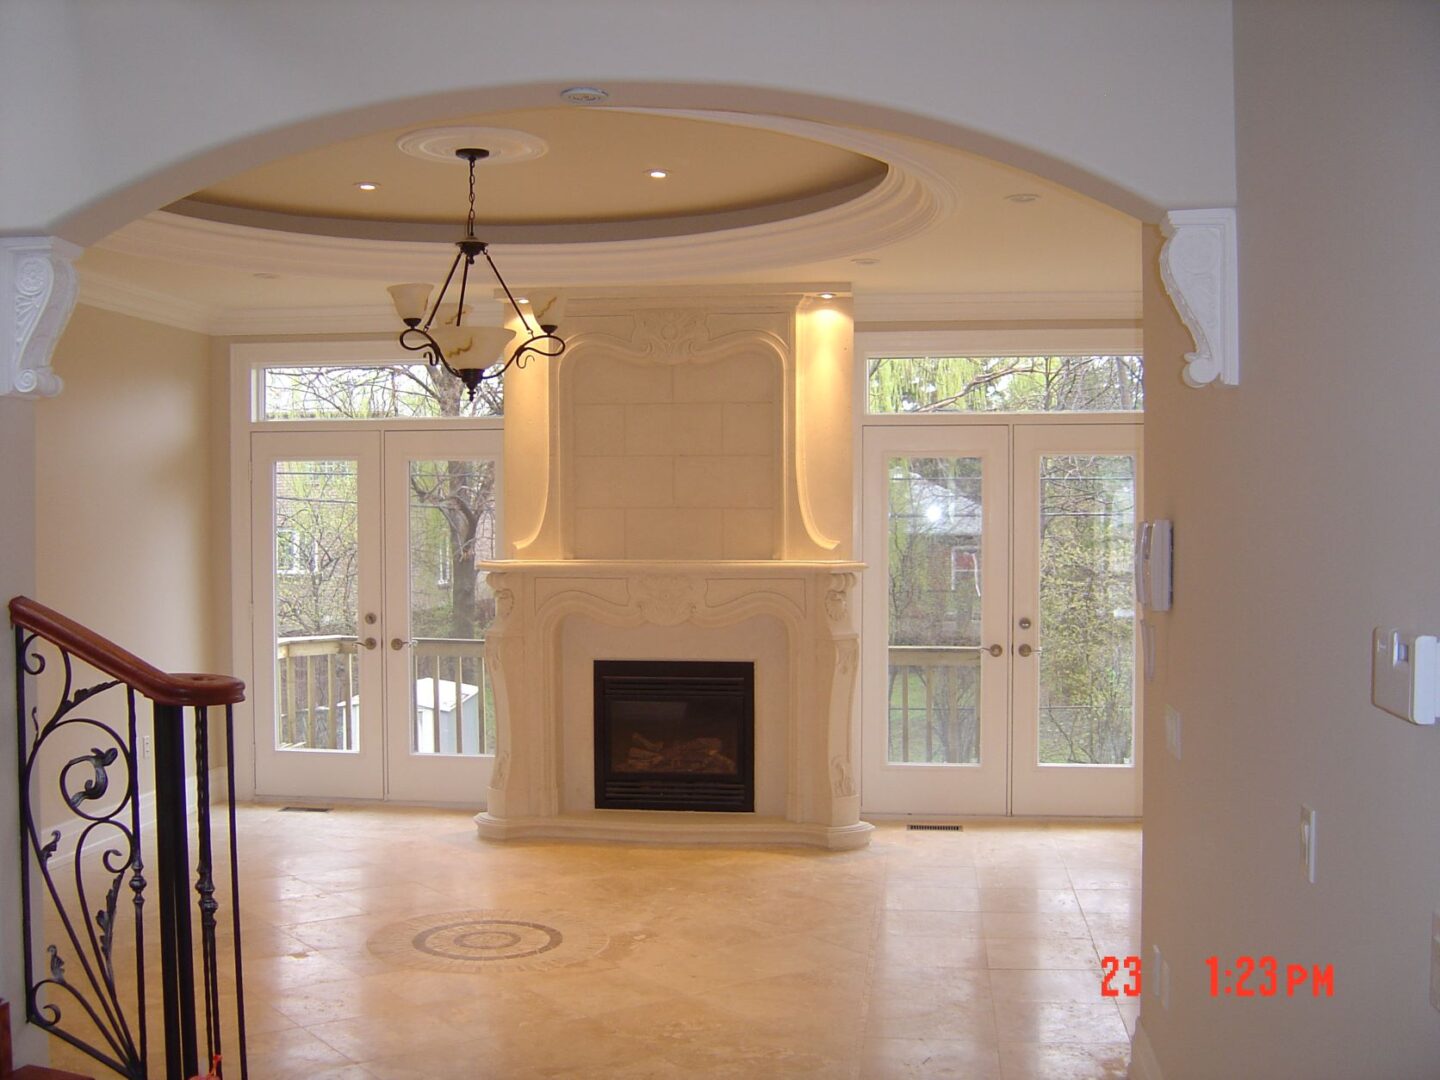 A Fireplace With White Mantle Space With Bulbs